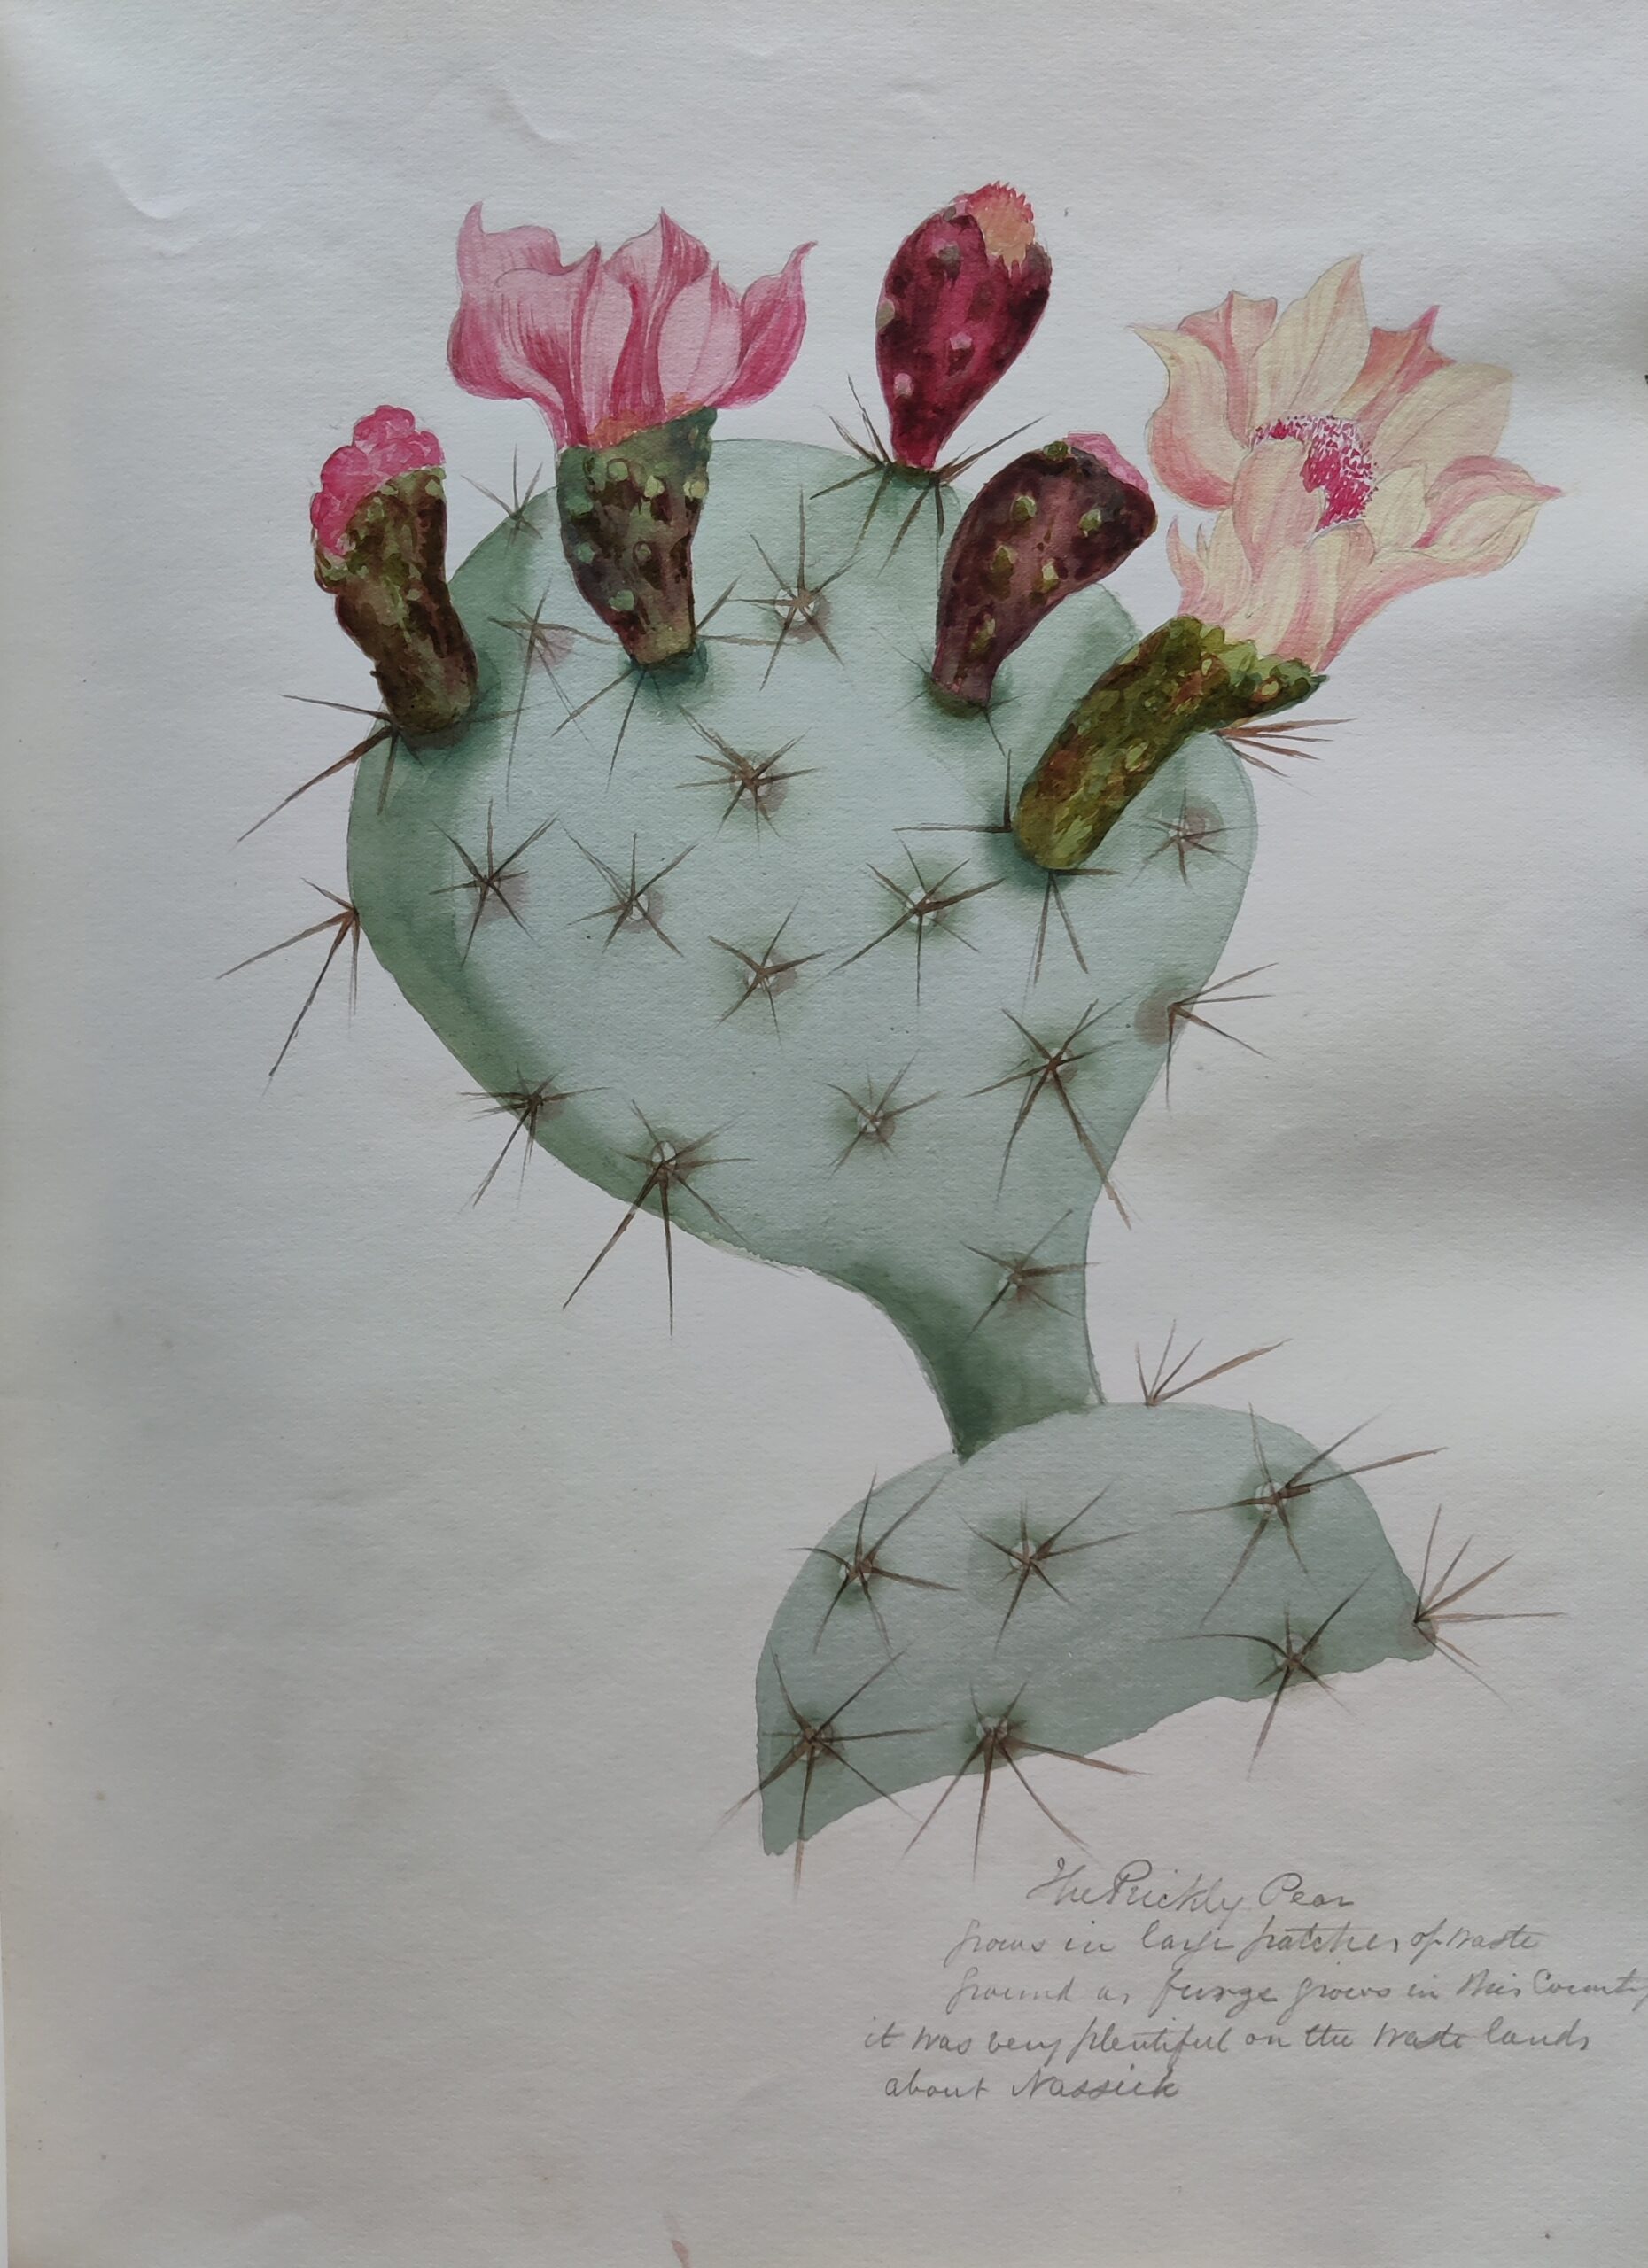 Life on the Deccan Plateau - From dinosaurs to diamonds - A Deccan Odyssey, Animals, Botanicals, Deccan, dinosaurs, featured, Flowers, geology, Gond Art, James Forbes, plants, prehistoric